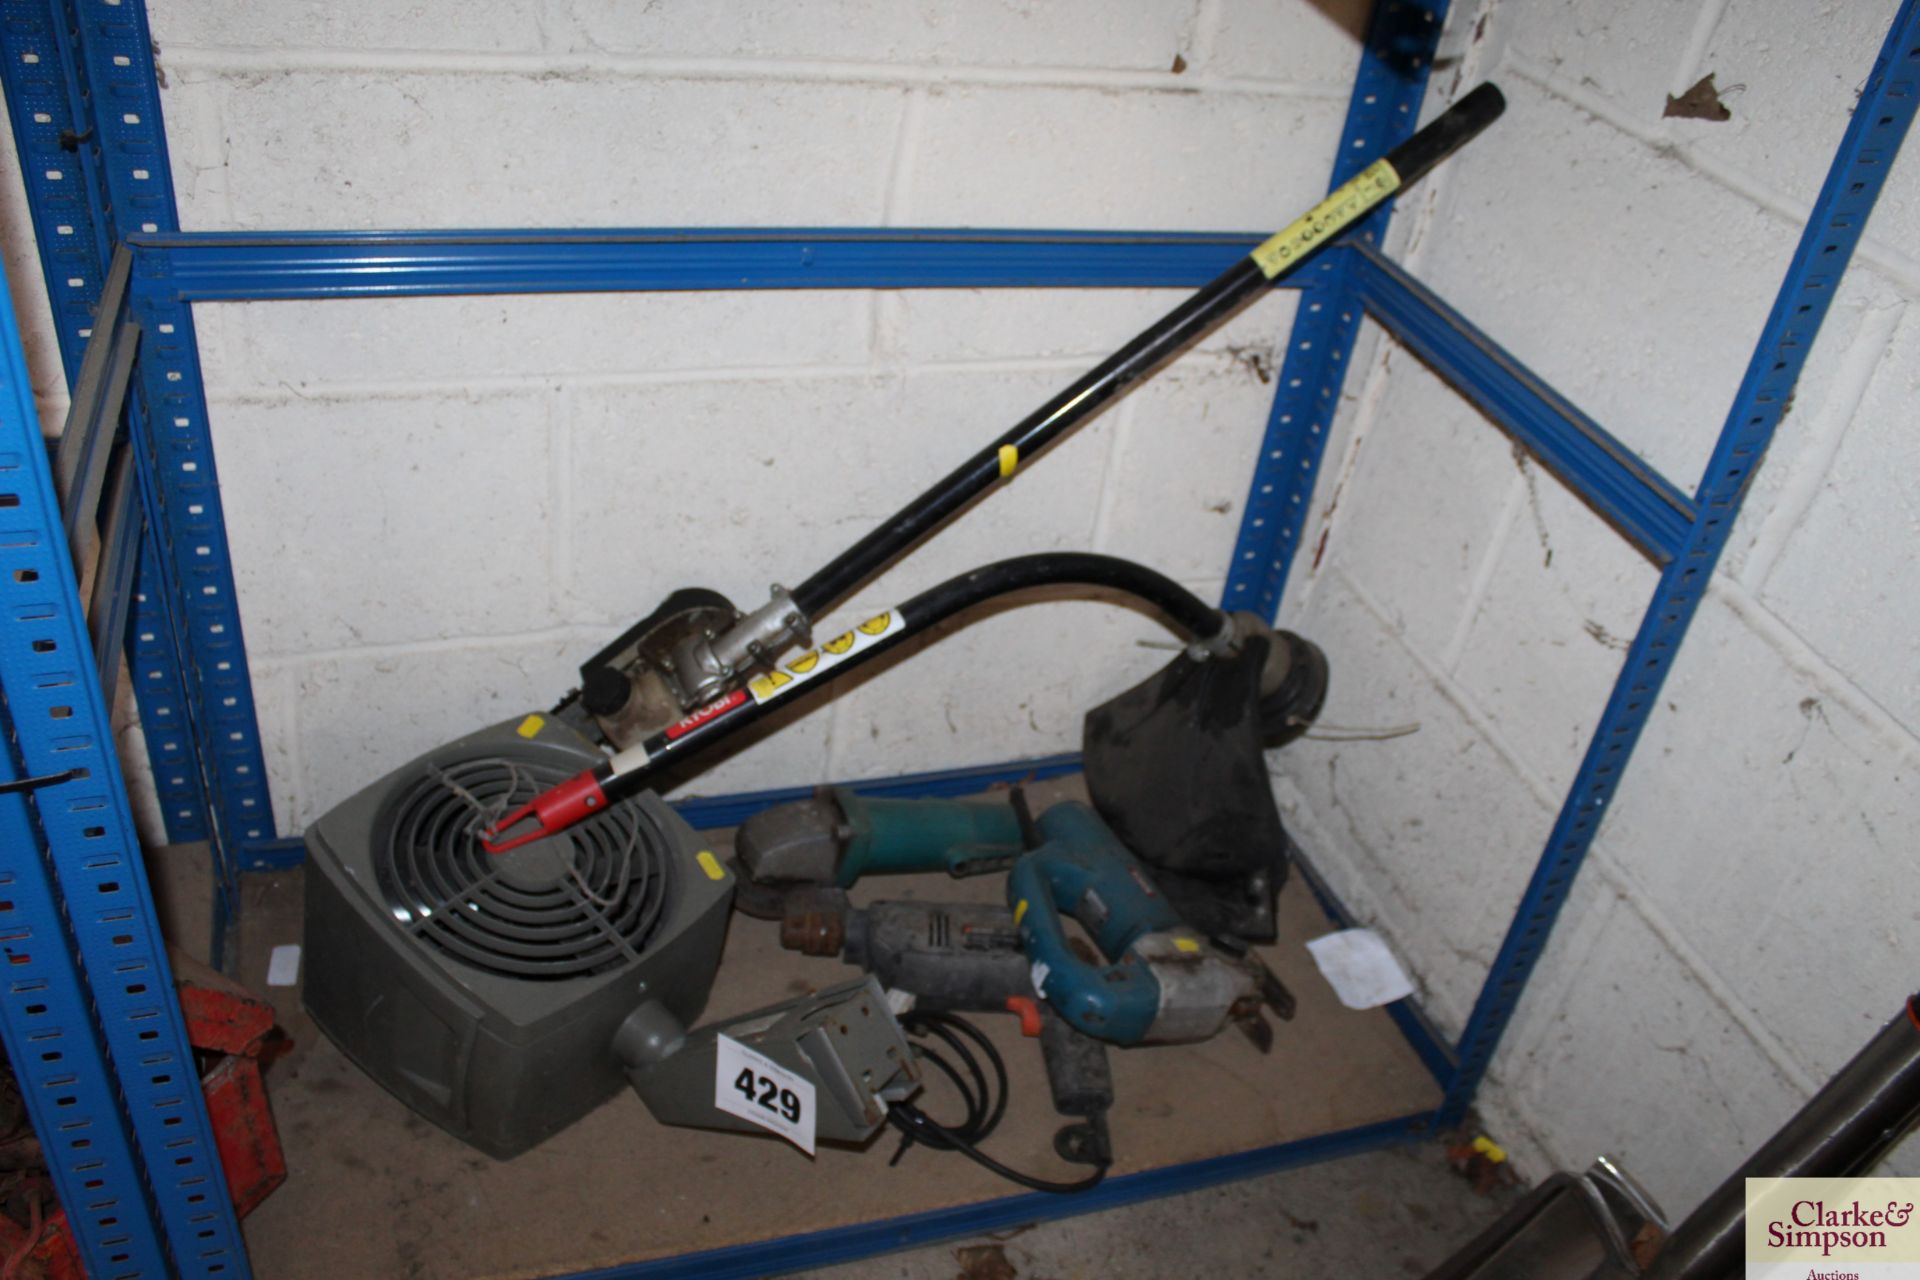 Strimmer attachments, heater, old power tools etc.